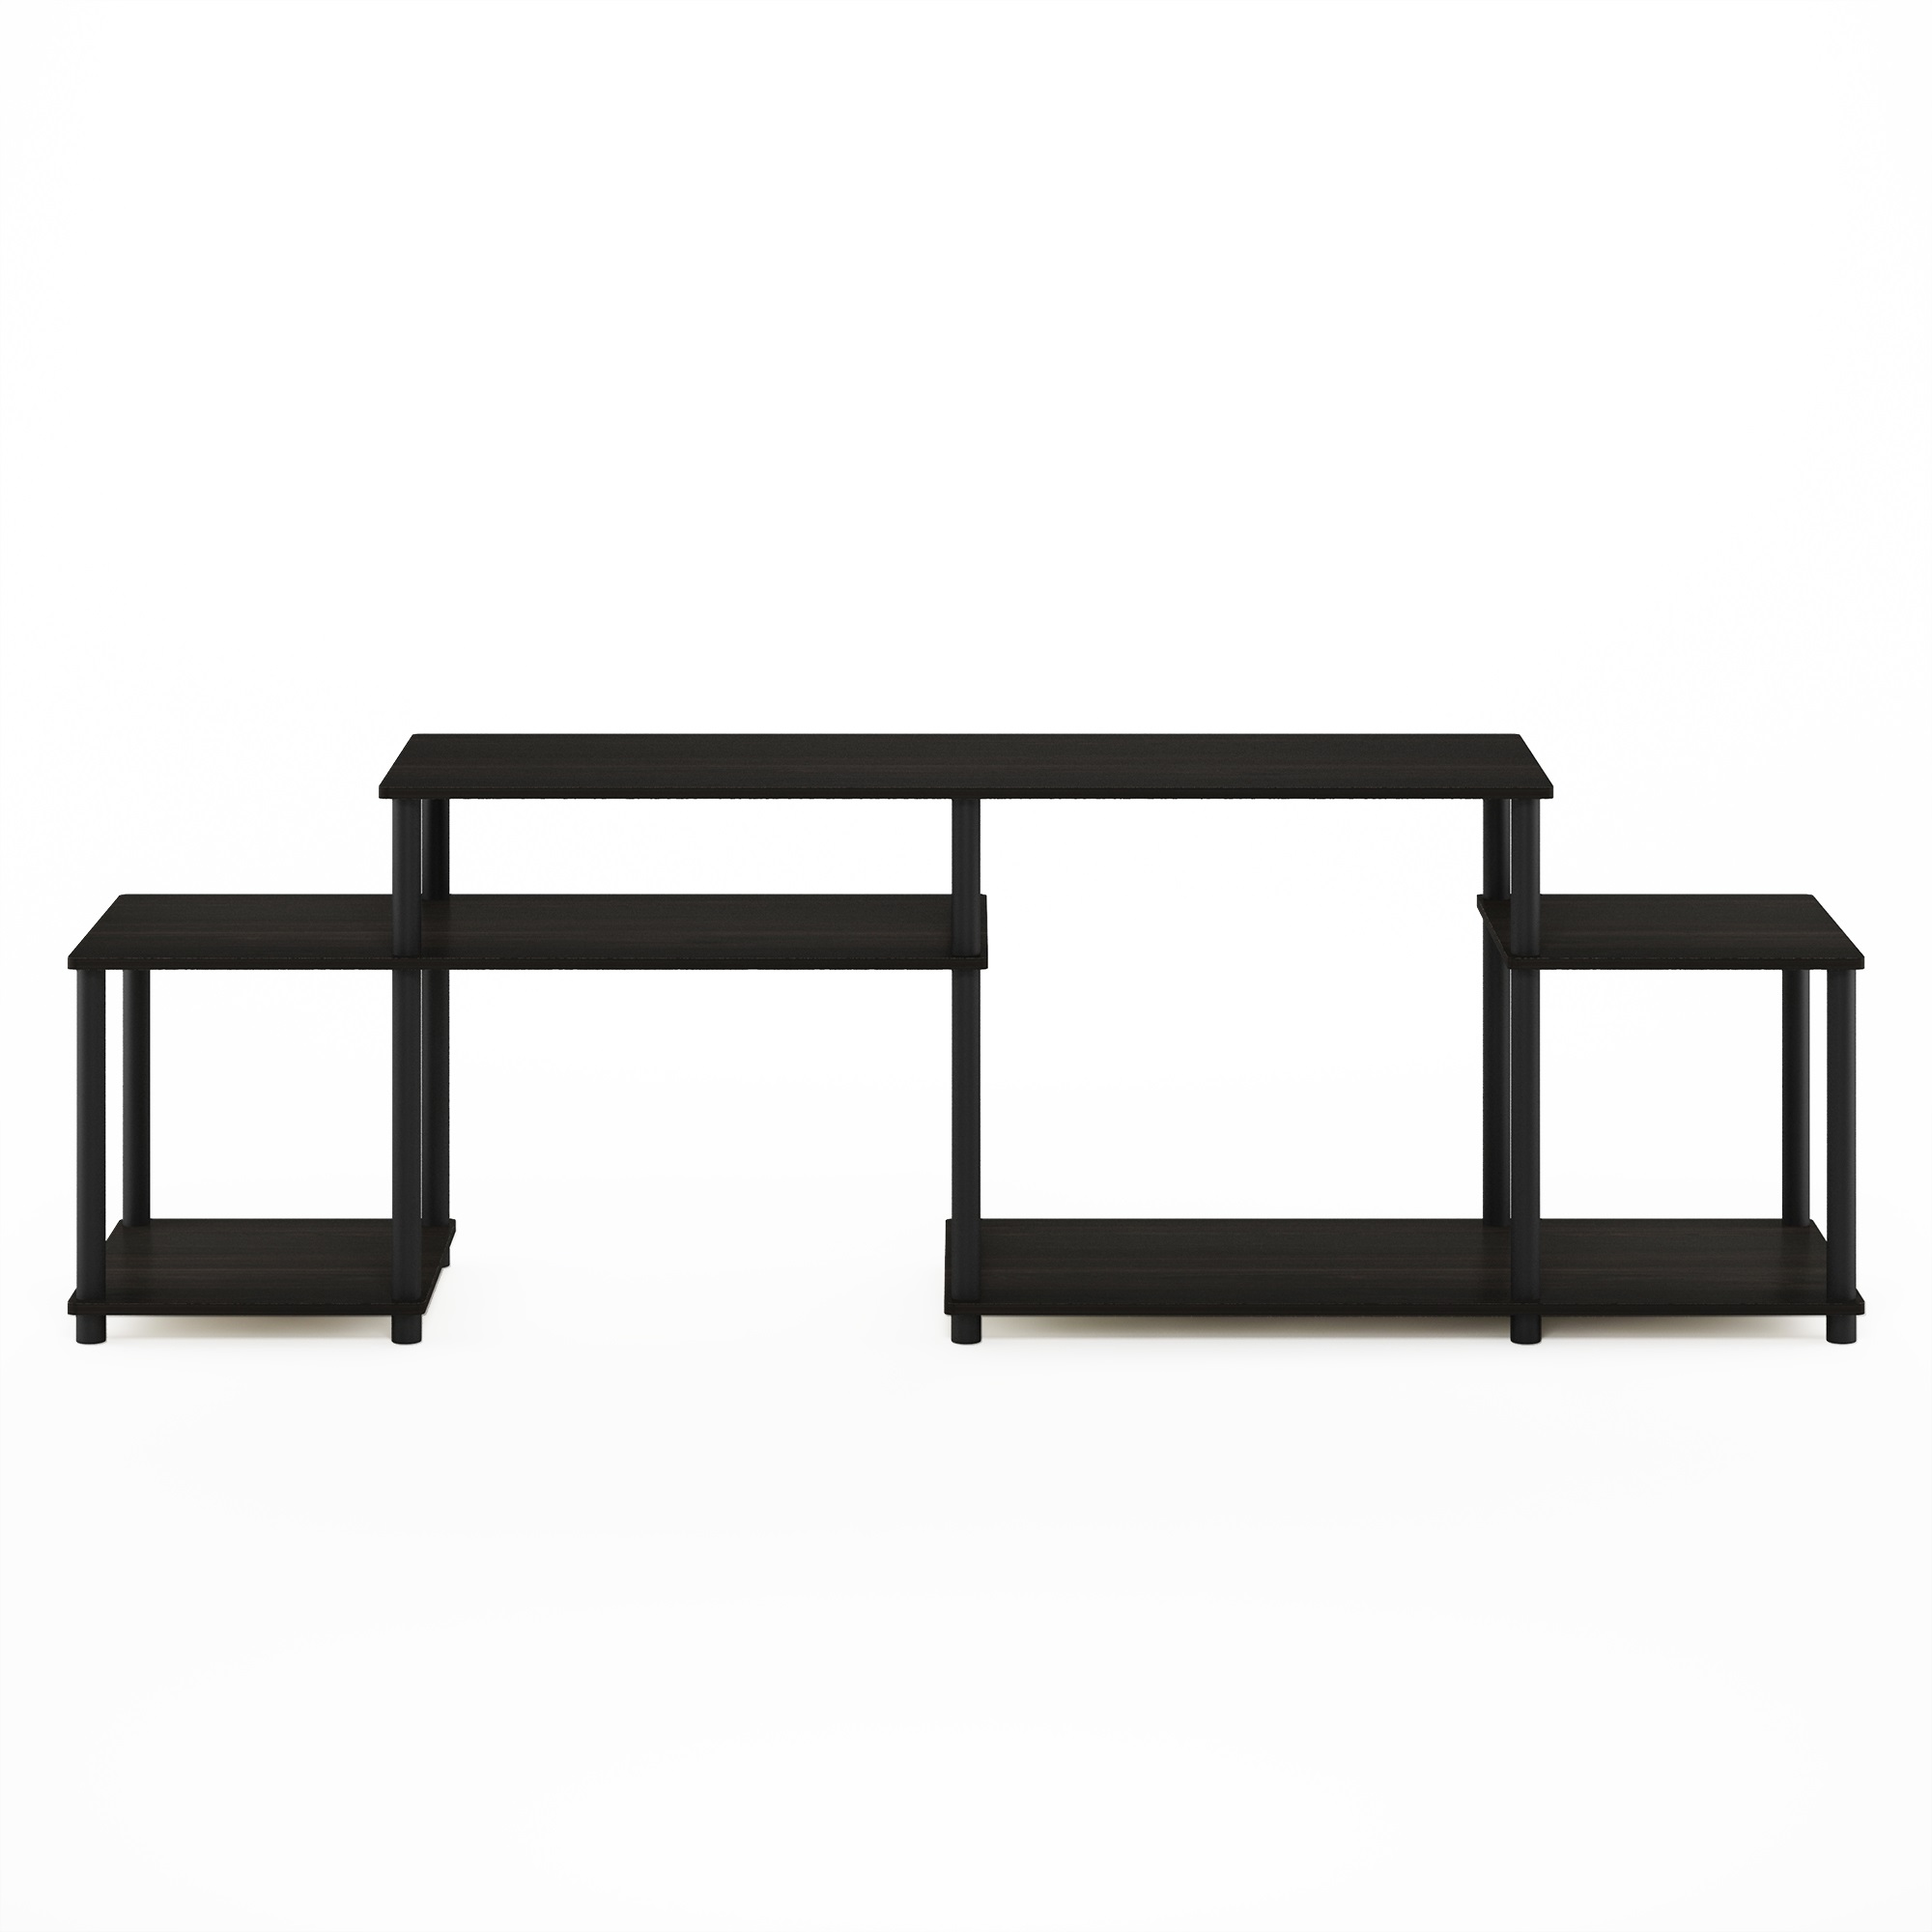 Furinno Turn-N-Tube Handel TV Stand for TV up to 55 Inch, Espresso/Black - image 3 of 3